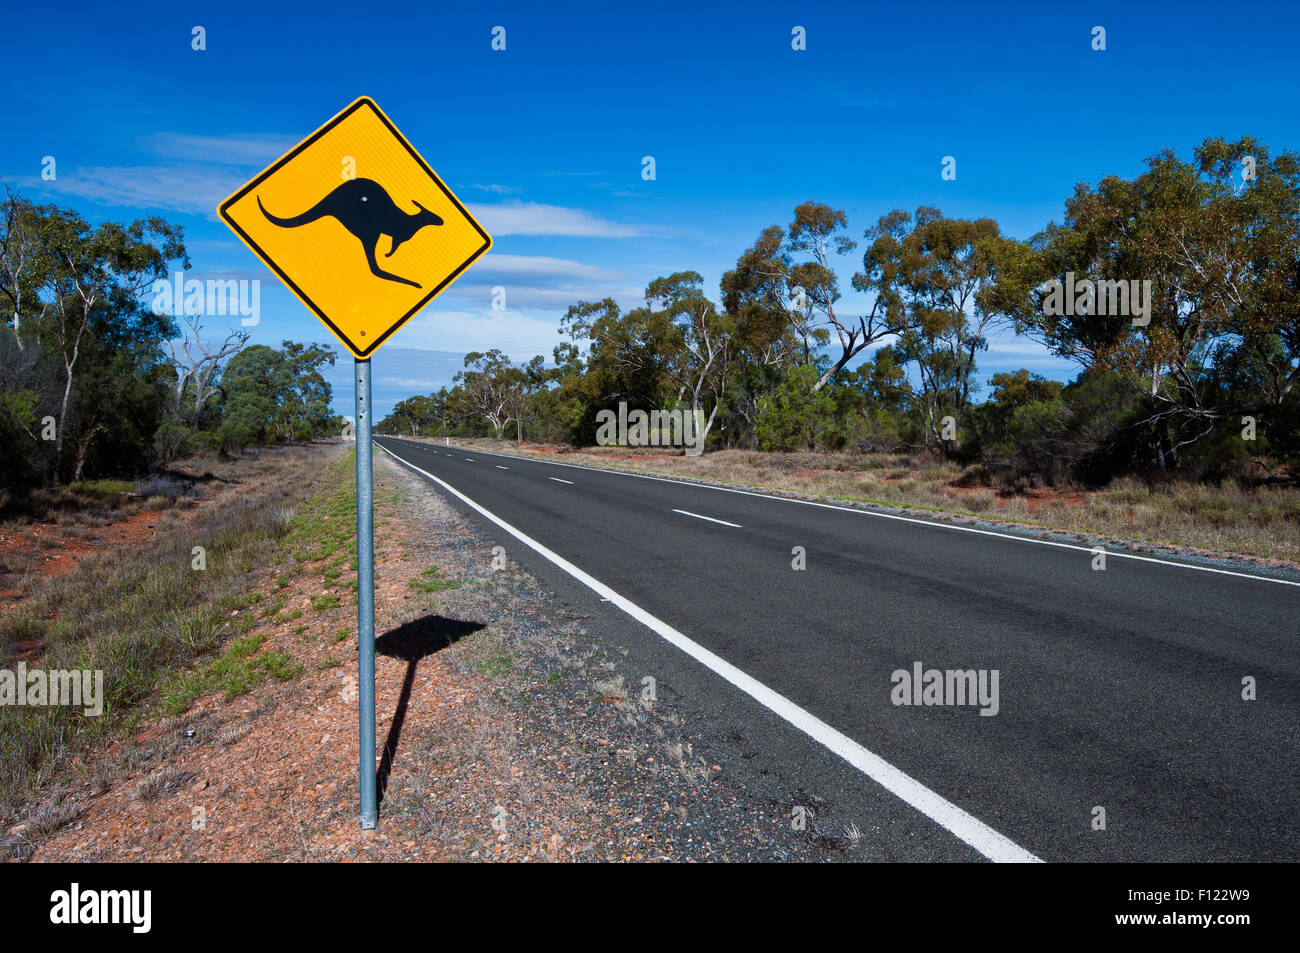 Kangaroo road sign on an outback road. Stock Photo